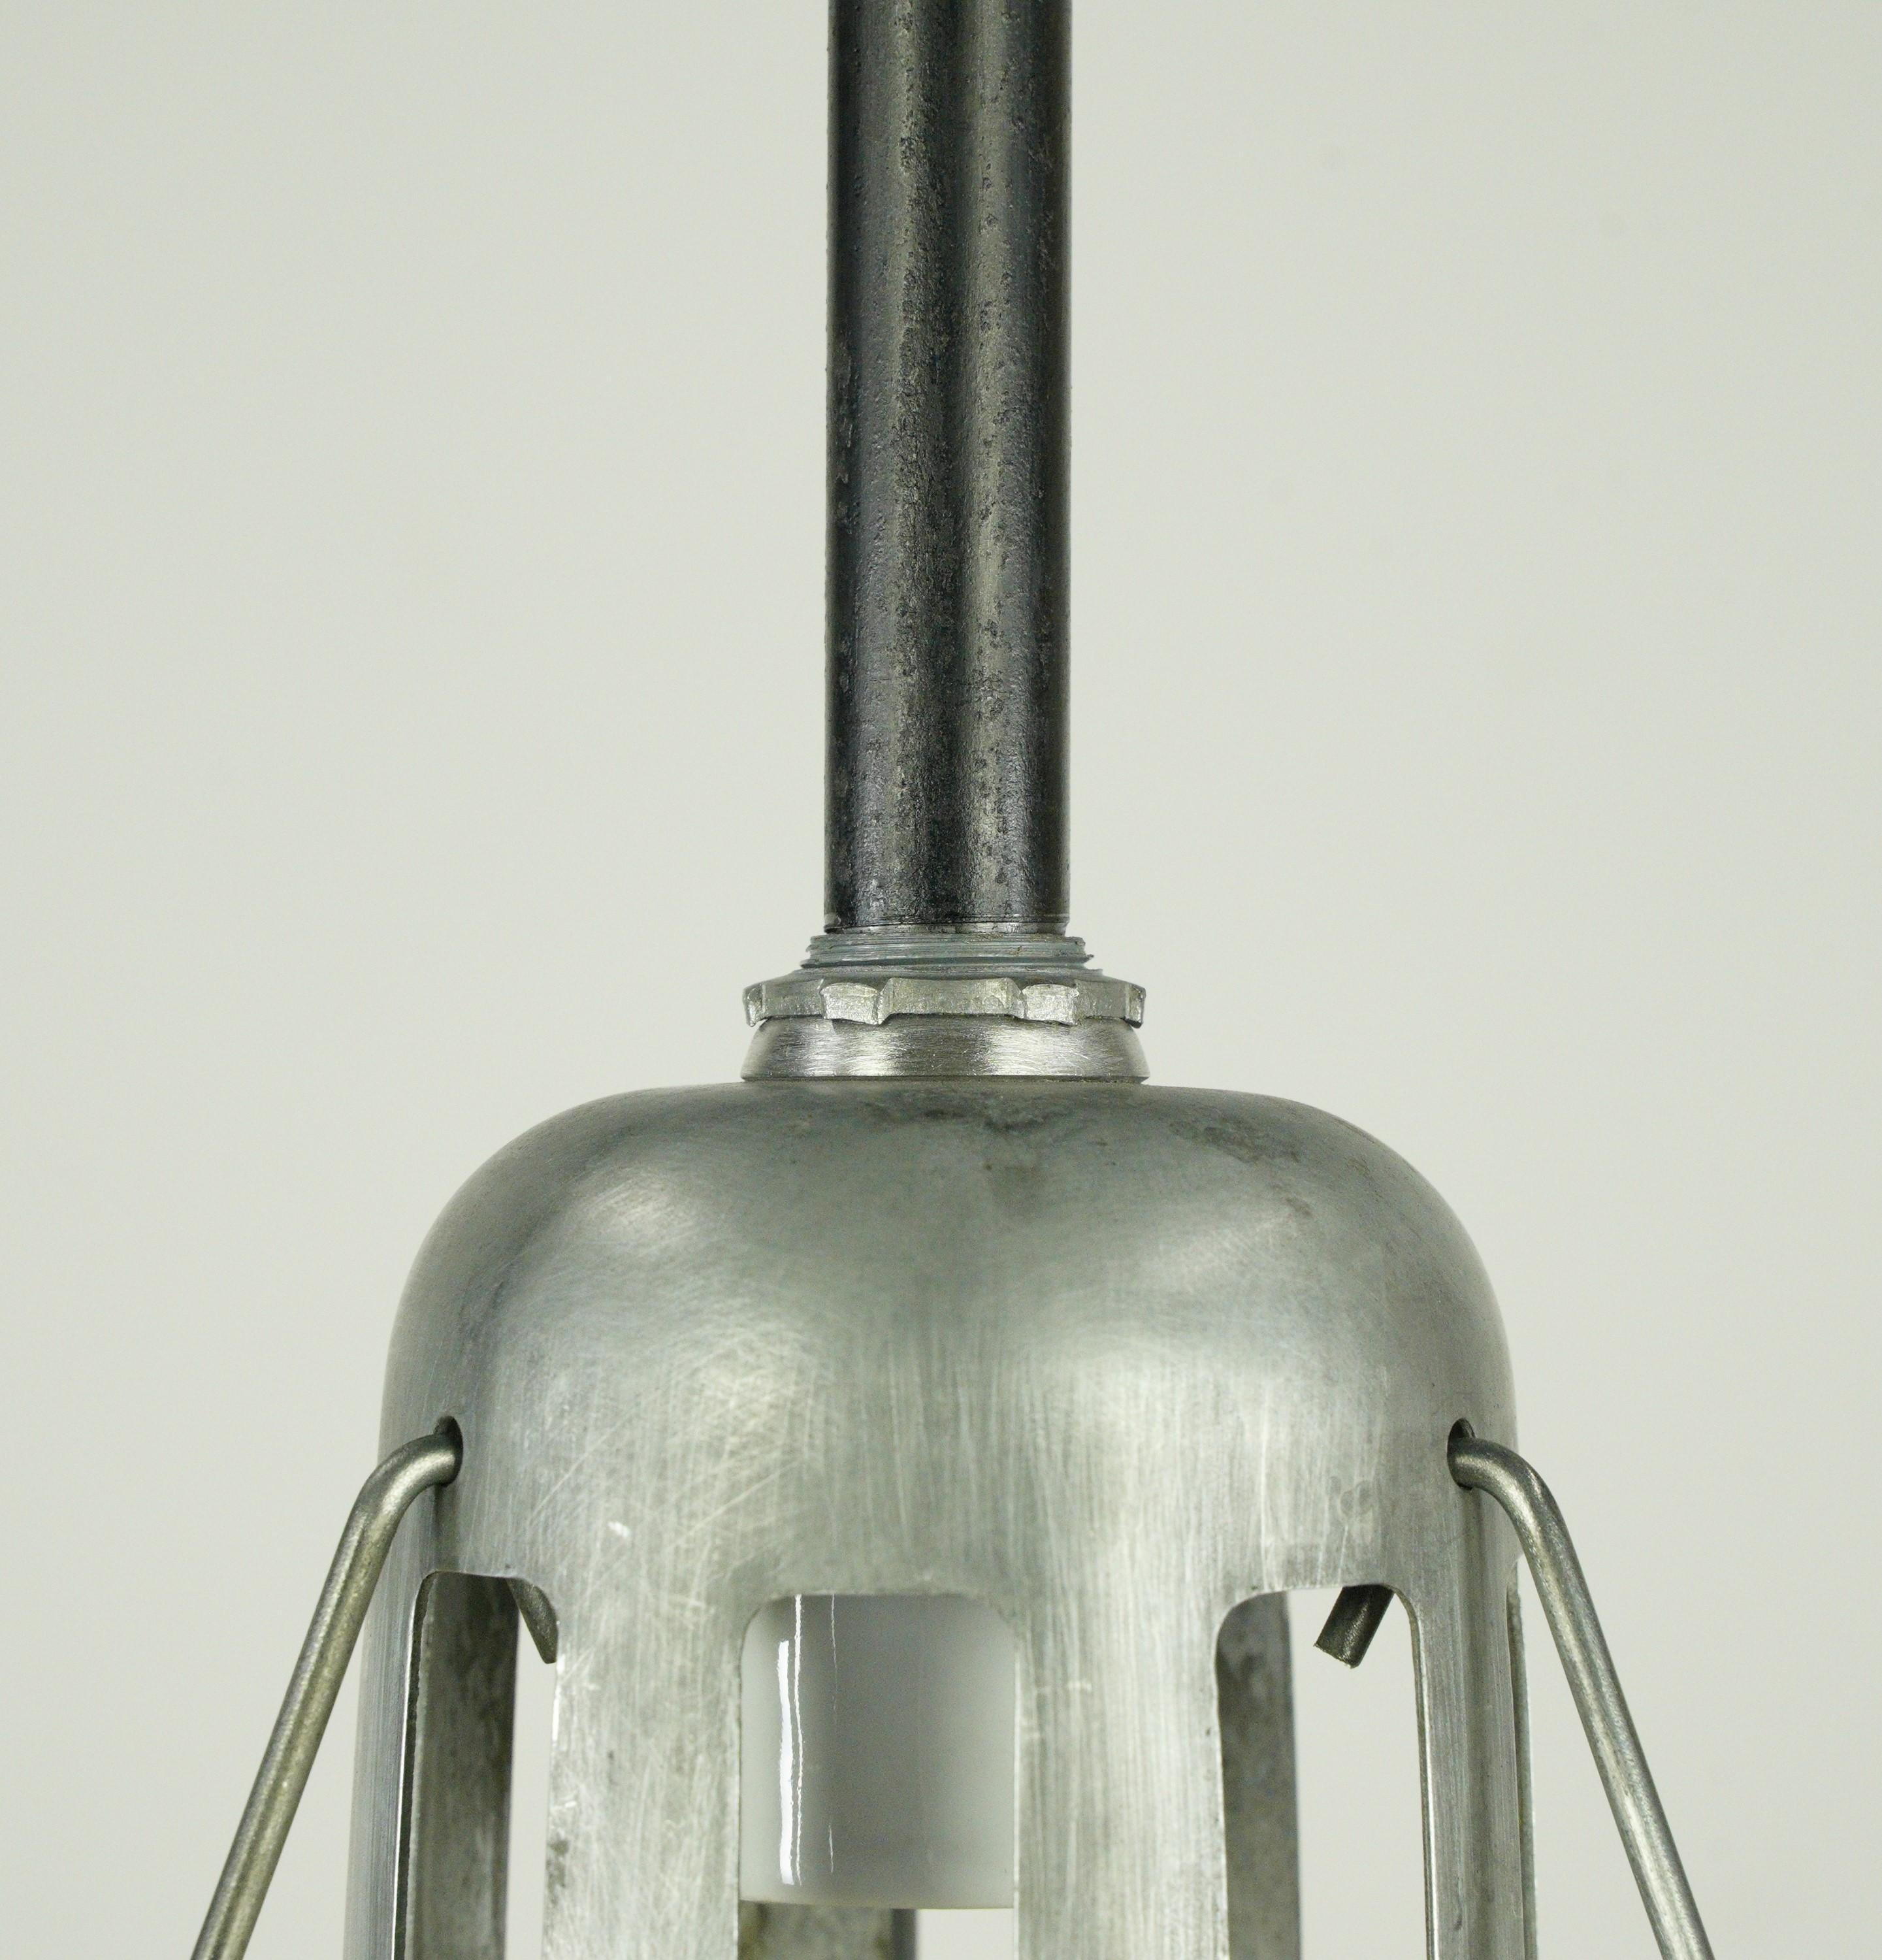 Industrial factory pendant light with a clear holophane glass shade and black steel pole construction. The price includes restoration of cleaning and rewiring. Cleaned and restored. Good condition with appropriate wear from age. Small quantity